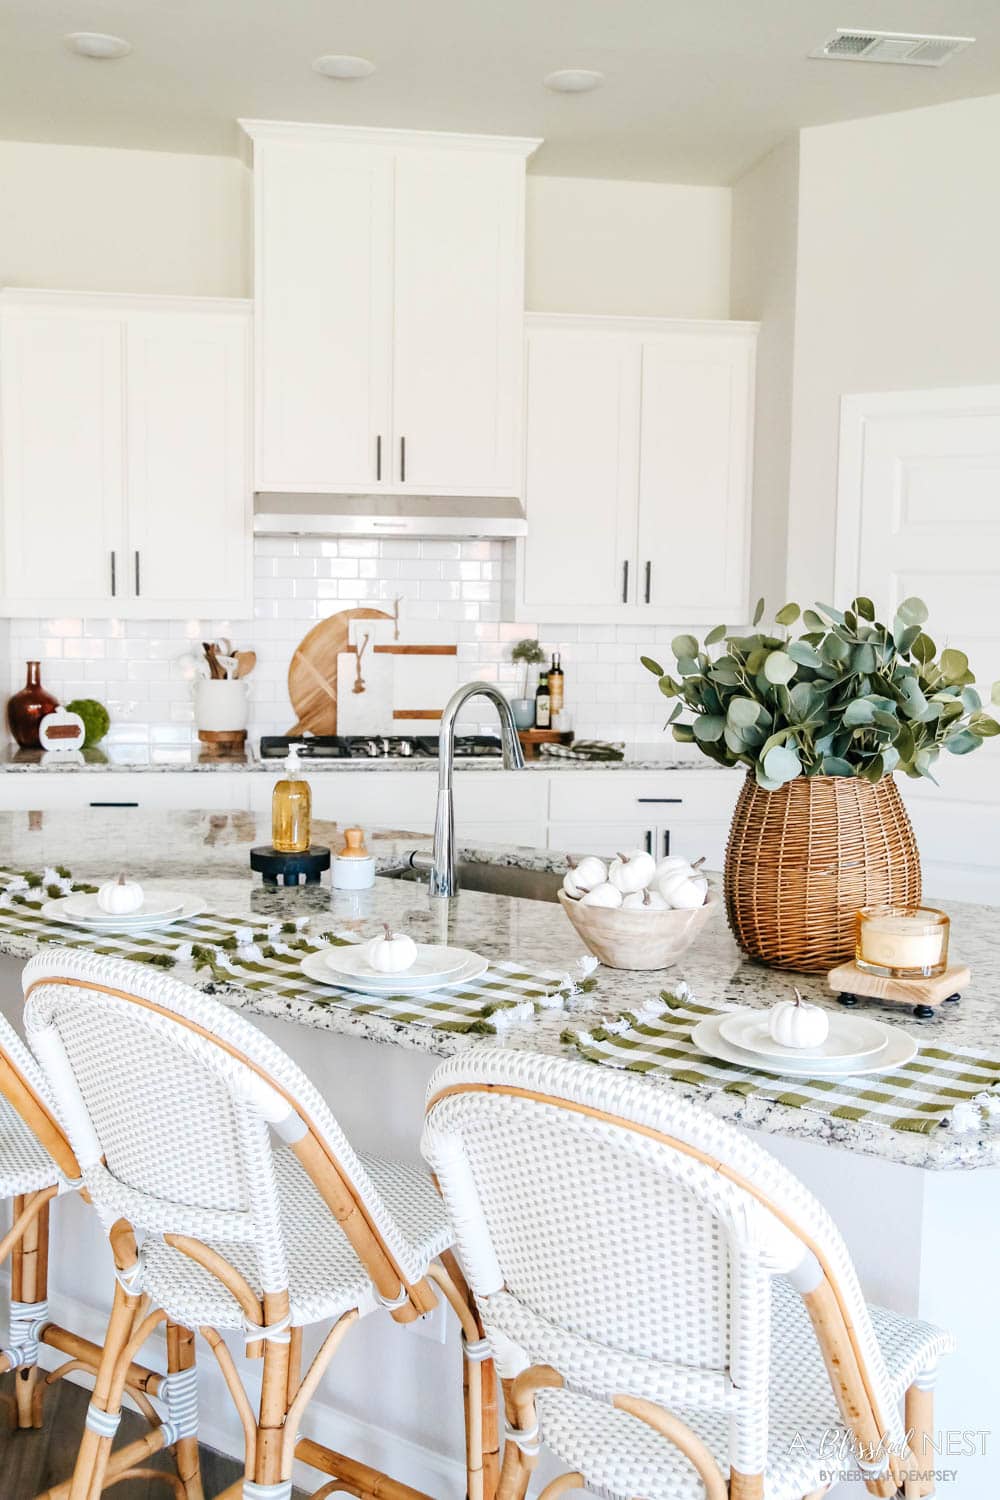 White kitchen with a basket used as a vase filled with eucalyptus leaves. View of the stove with cutting boards lined up.